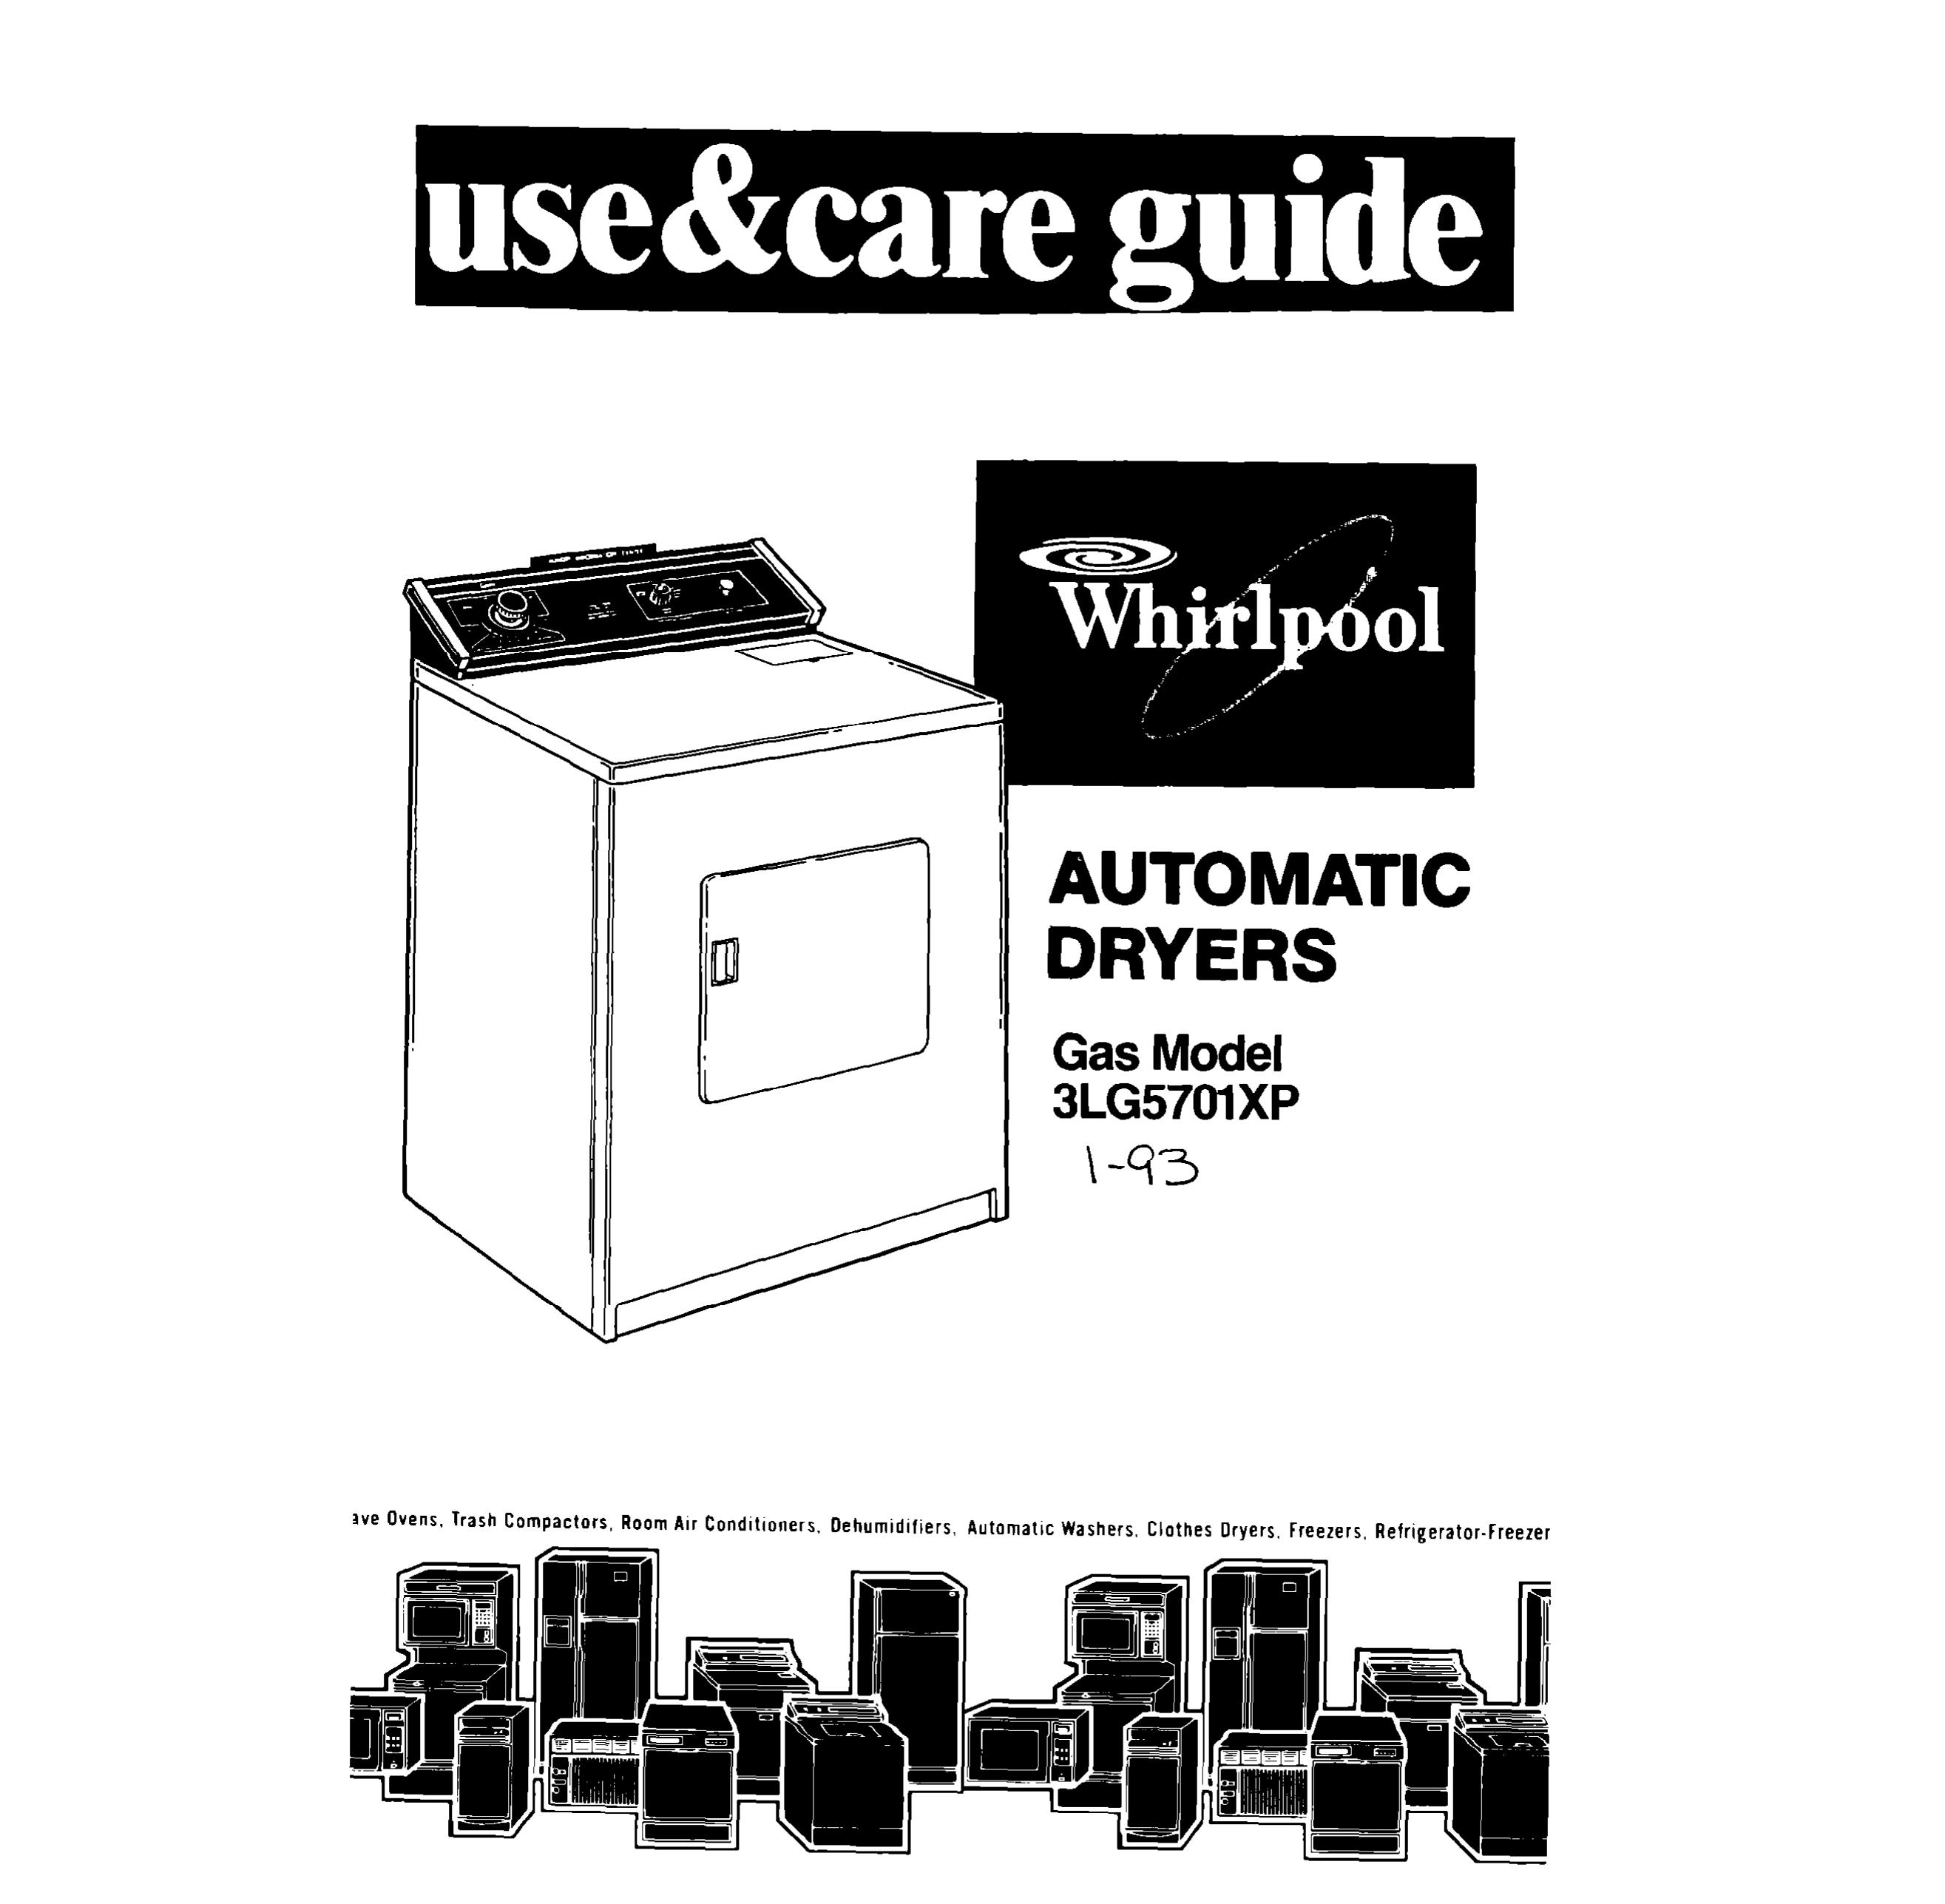 Whirlpool 3LG57OlXP Clothes Dryer User Manual